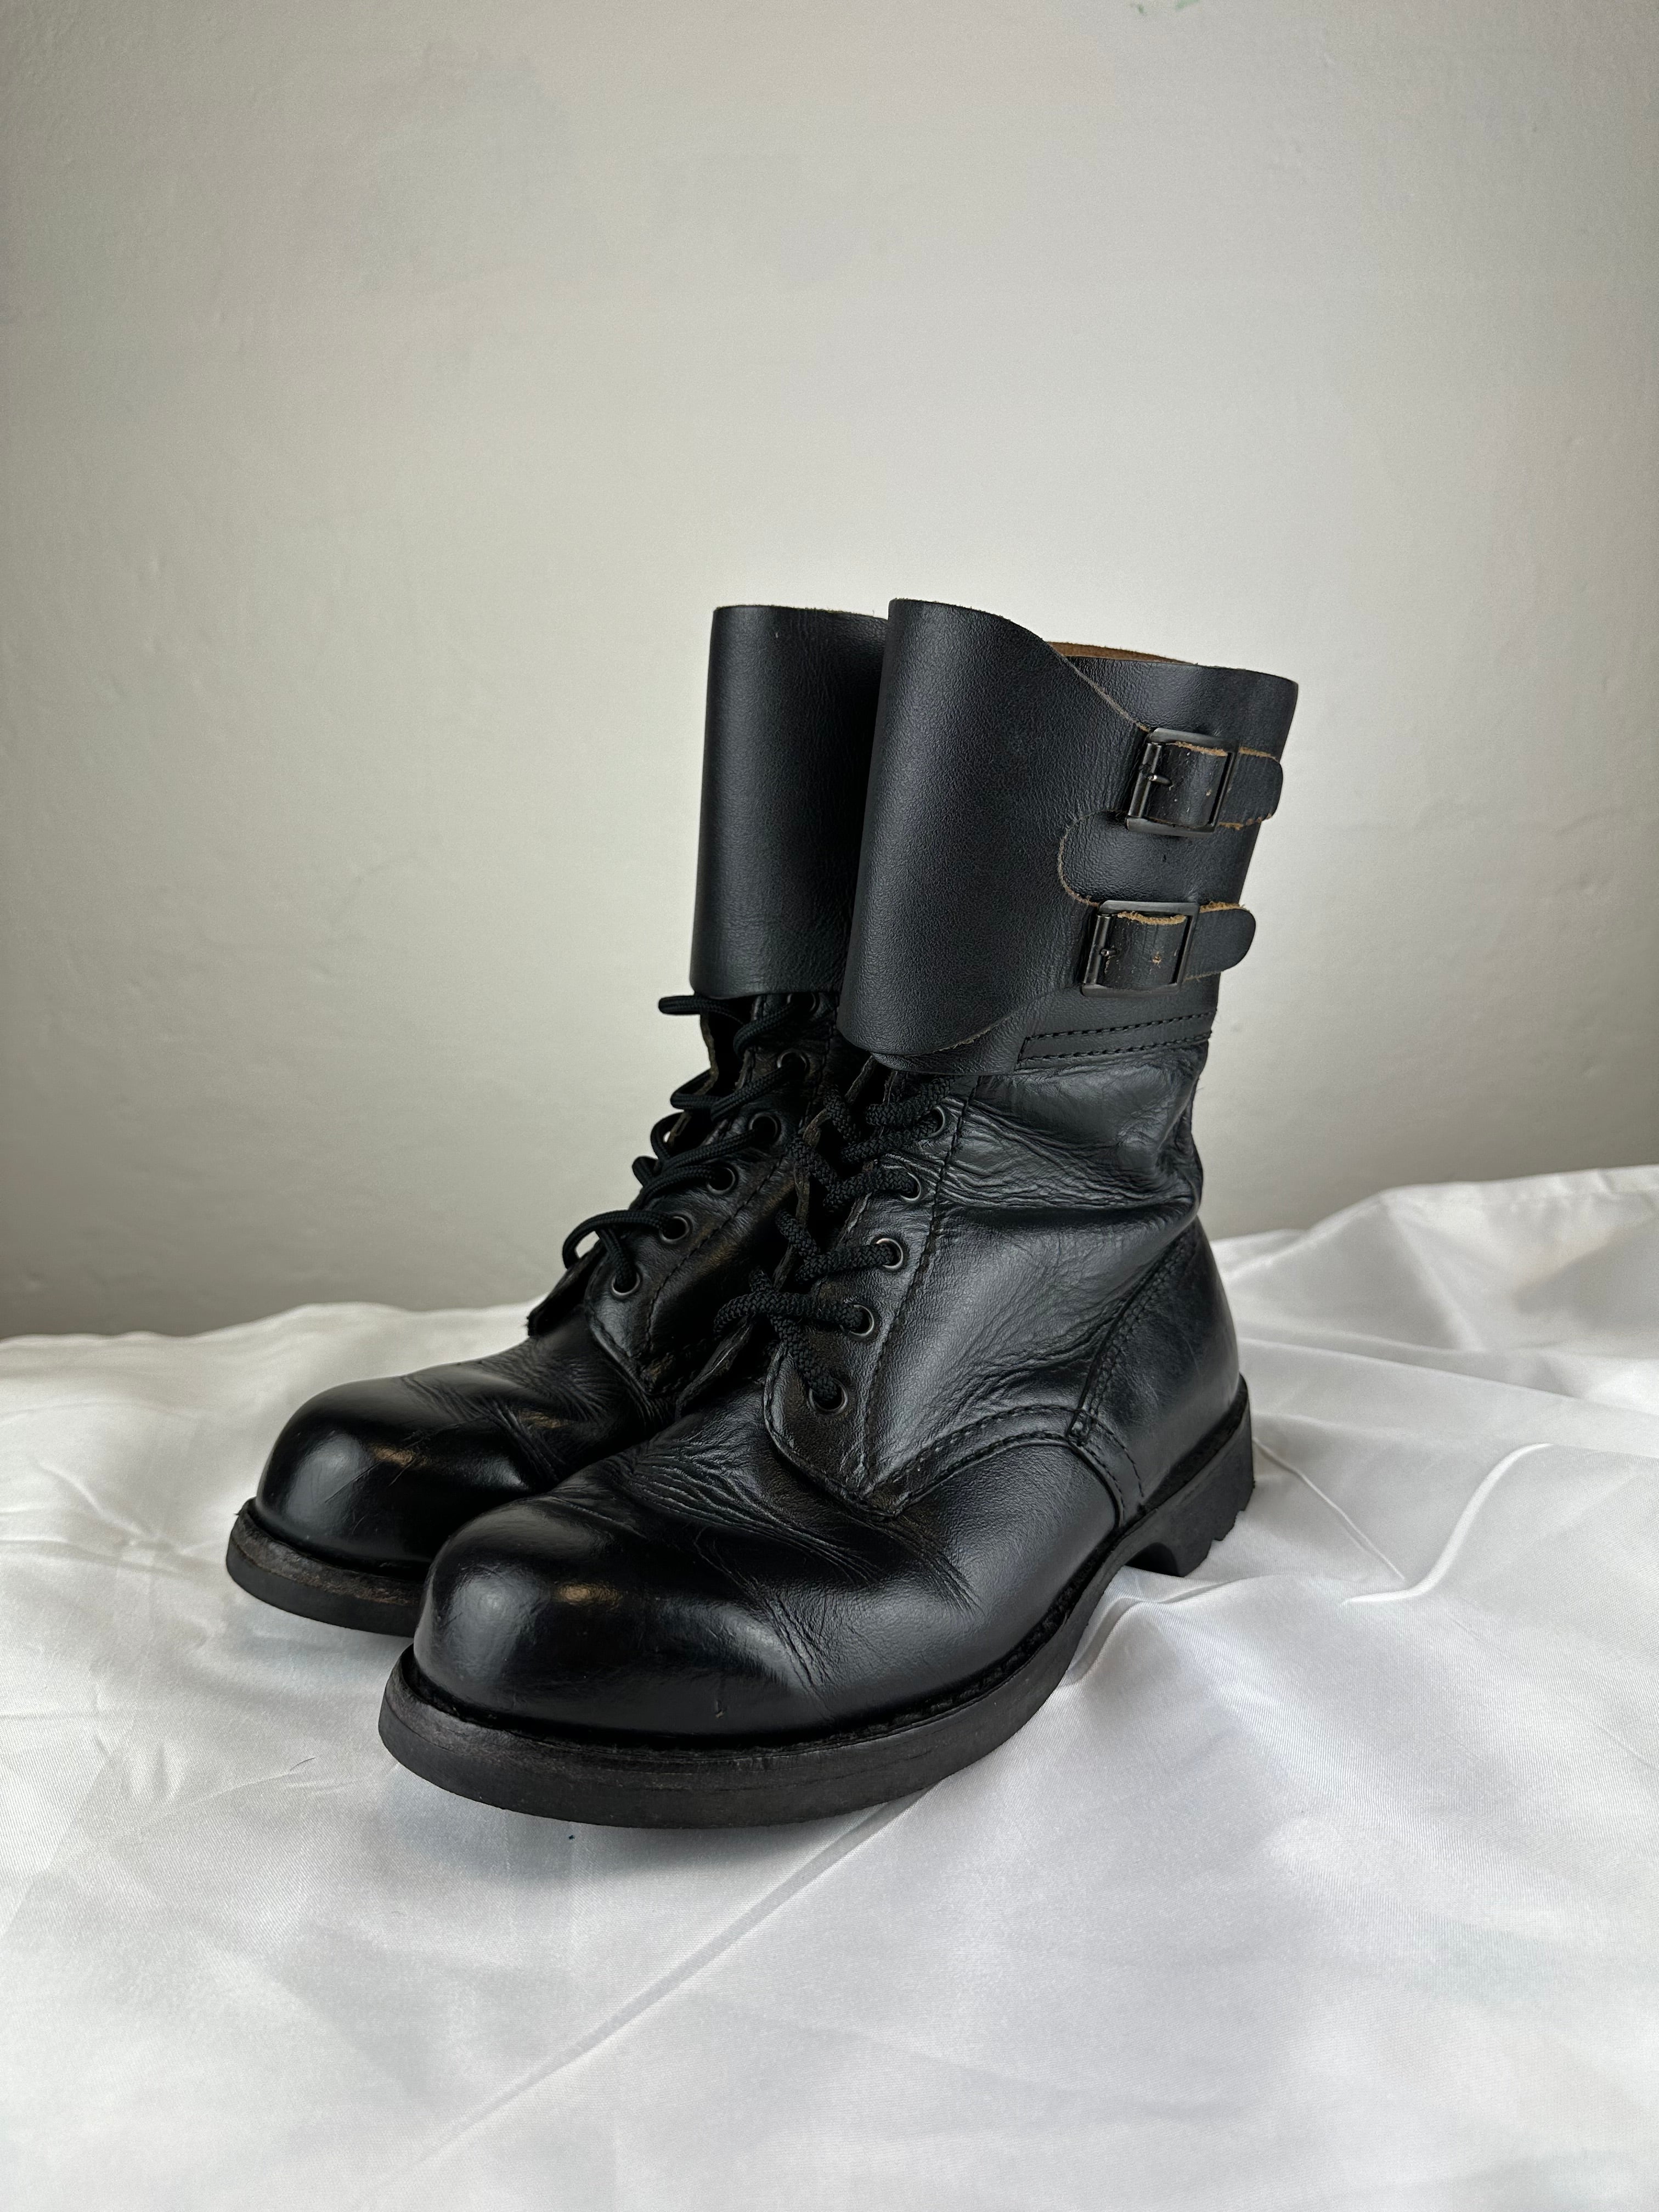 Vintage 1980s Military Boots - size 41